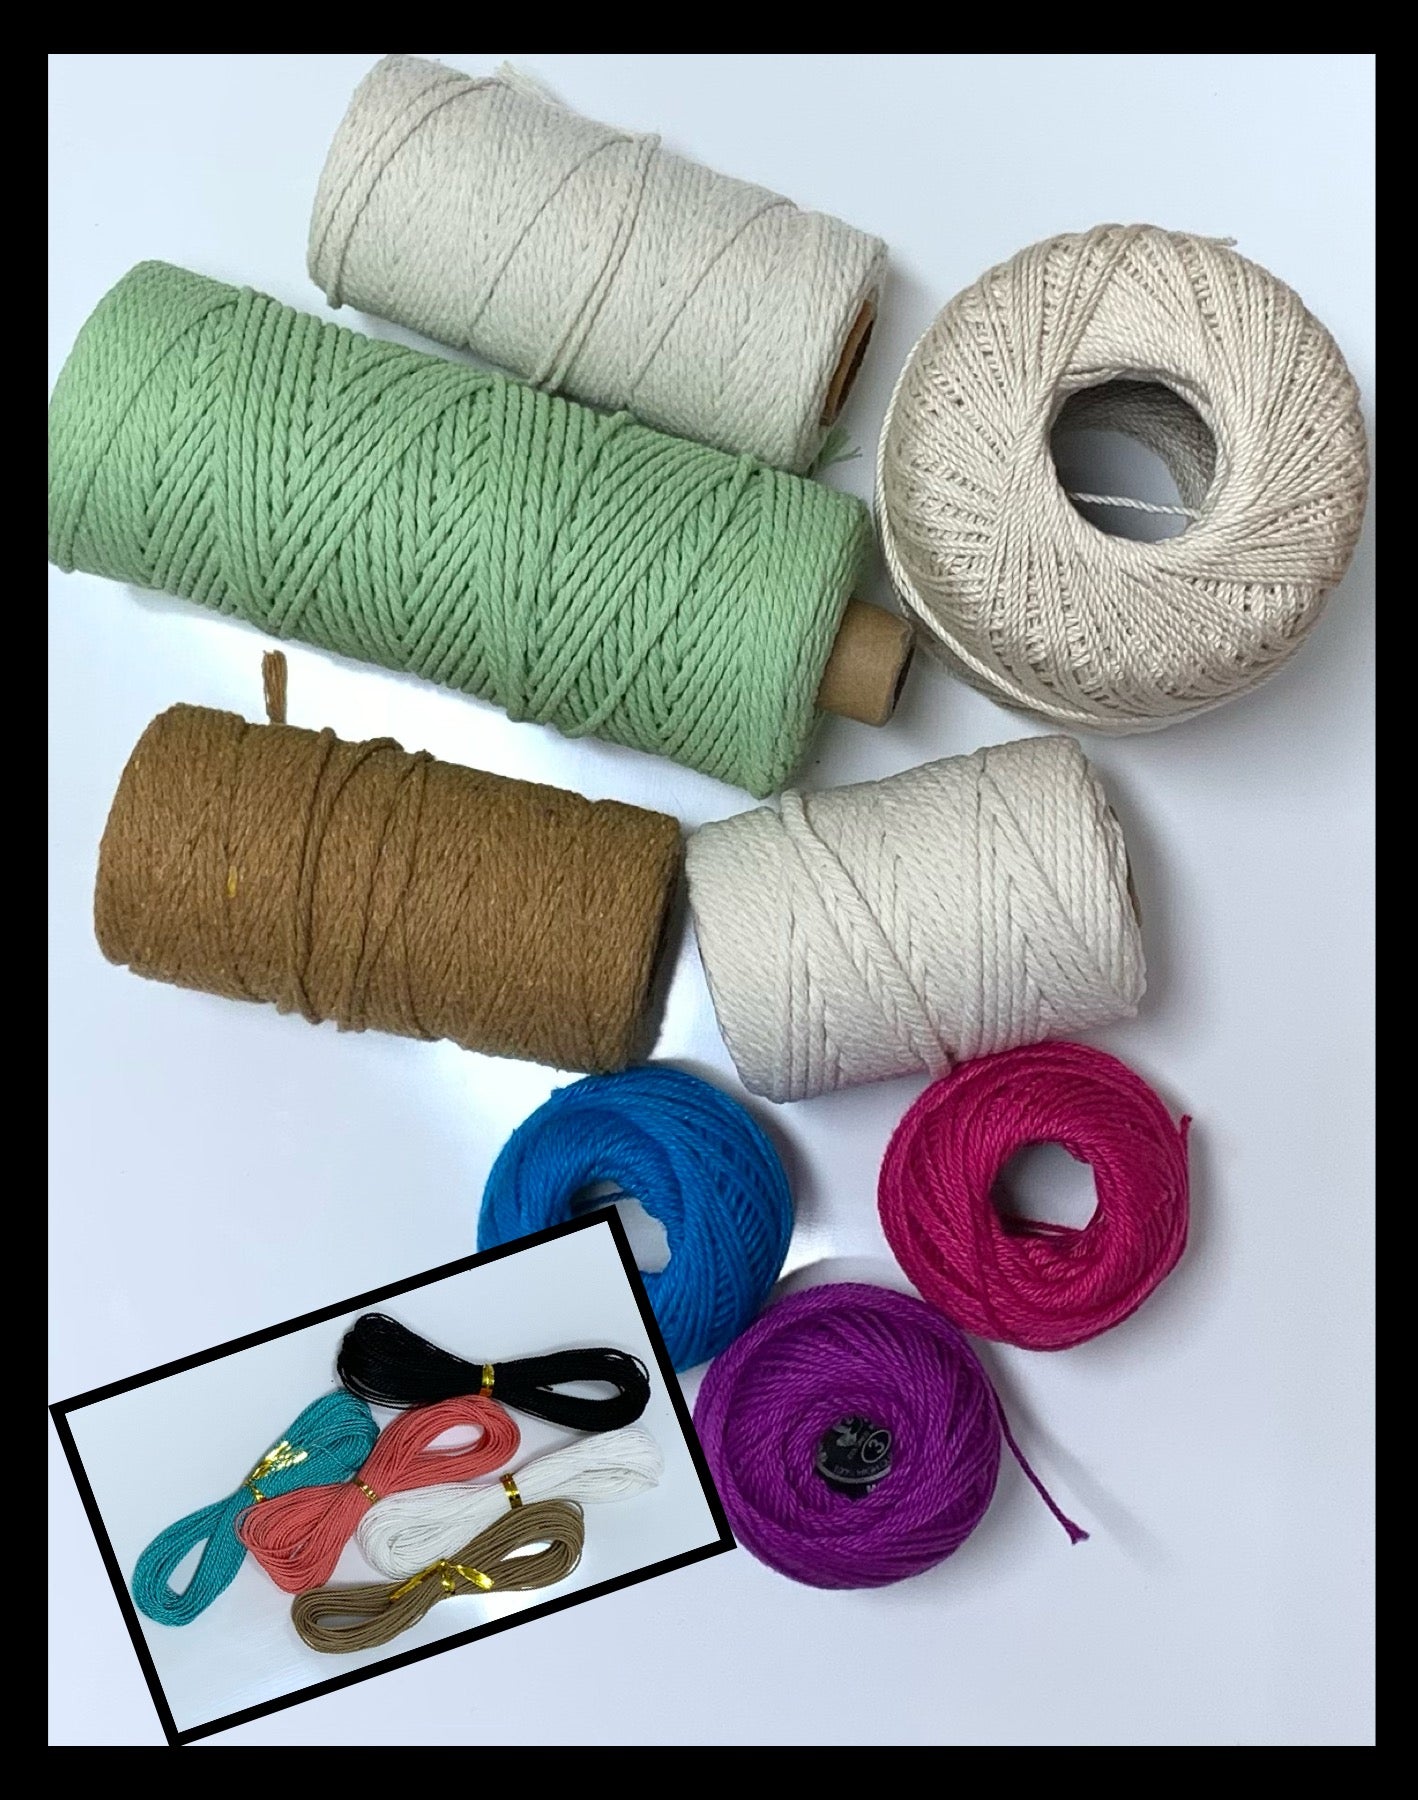 Macrame Cord of Various Sizes, Crochet Thread, and Waxed Cotton Cord for Jewelry. and 